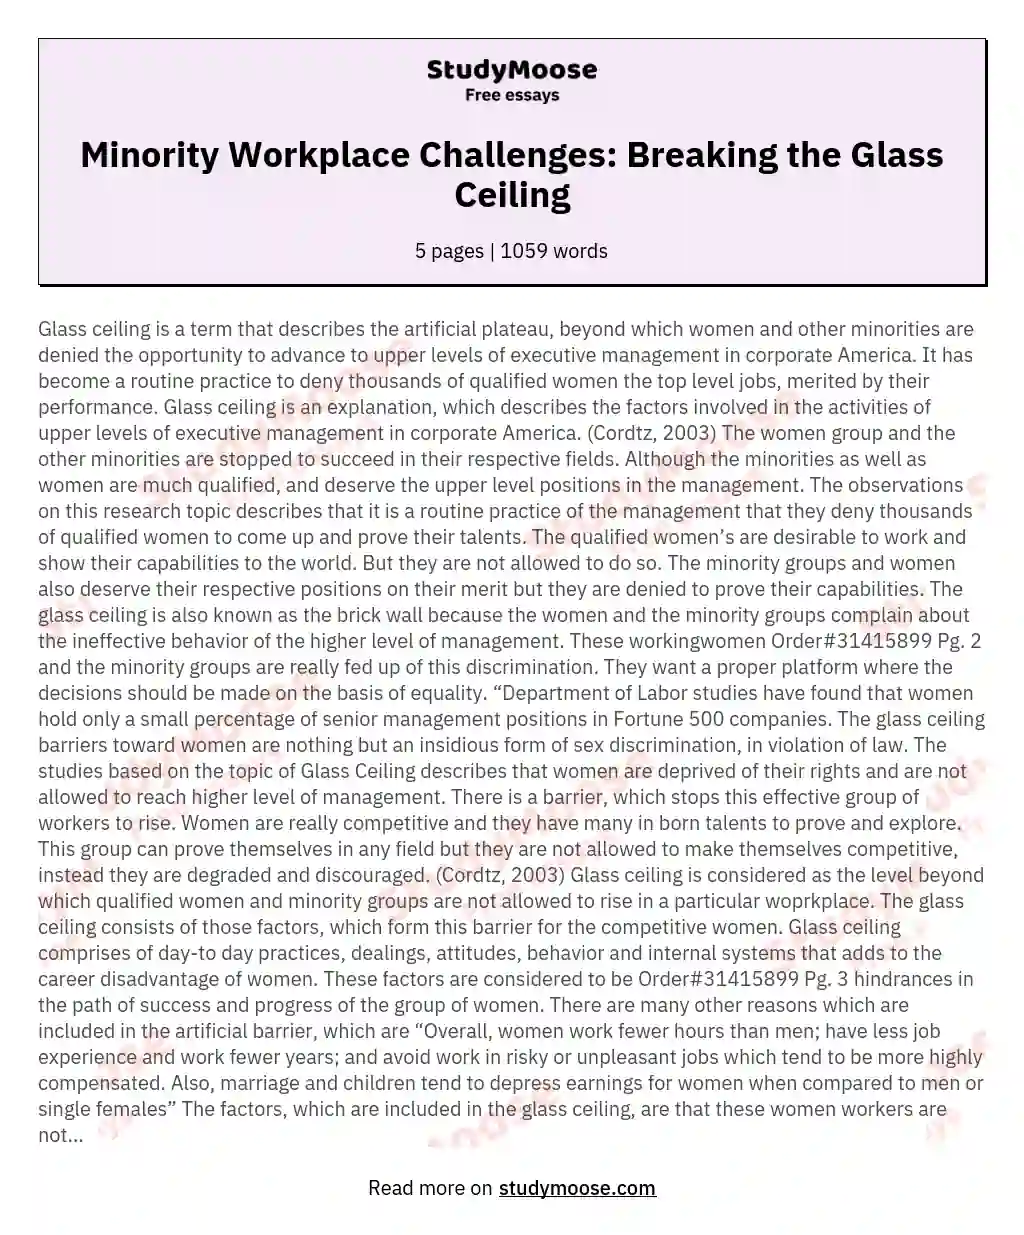 Minority Workplace Challenges: Breaking the Glass Ceiling essay